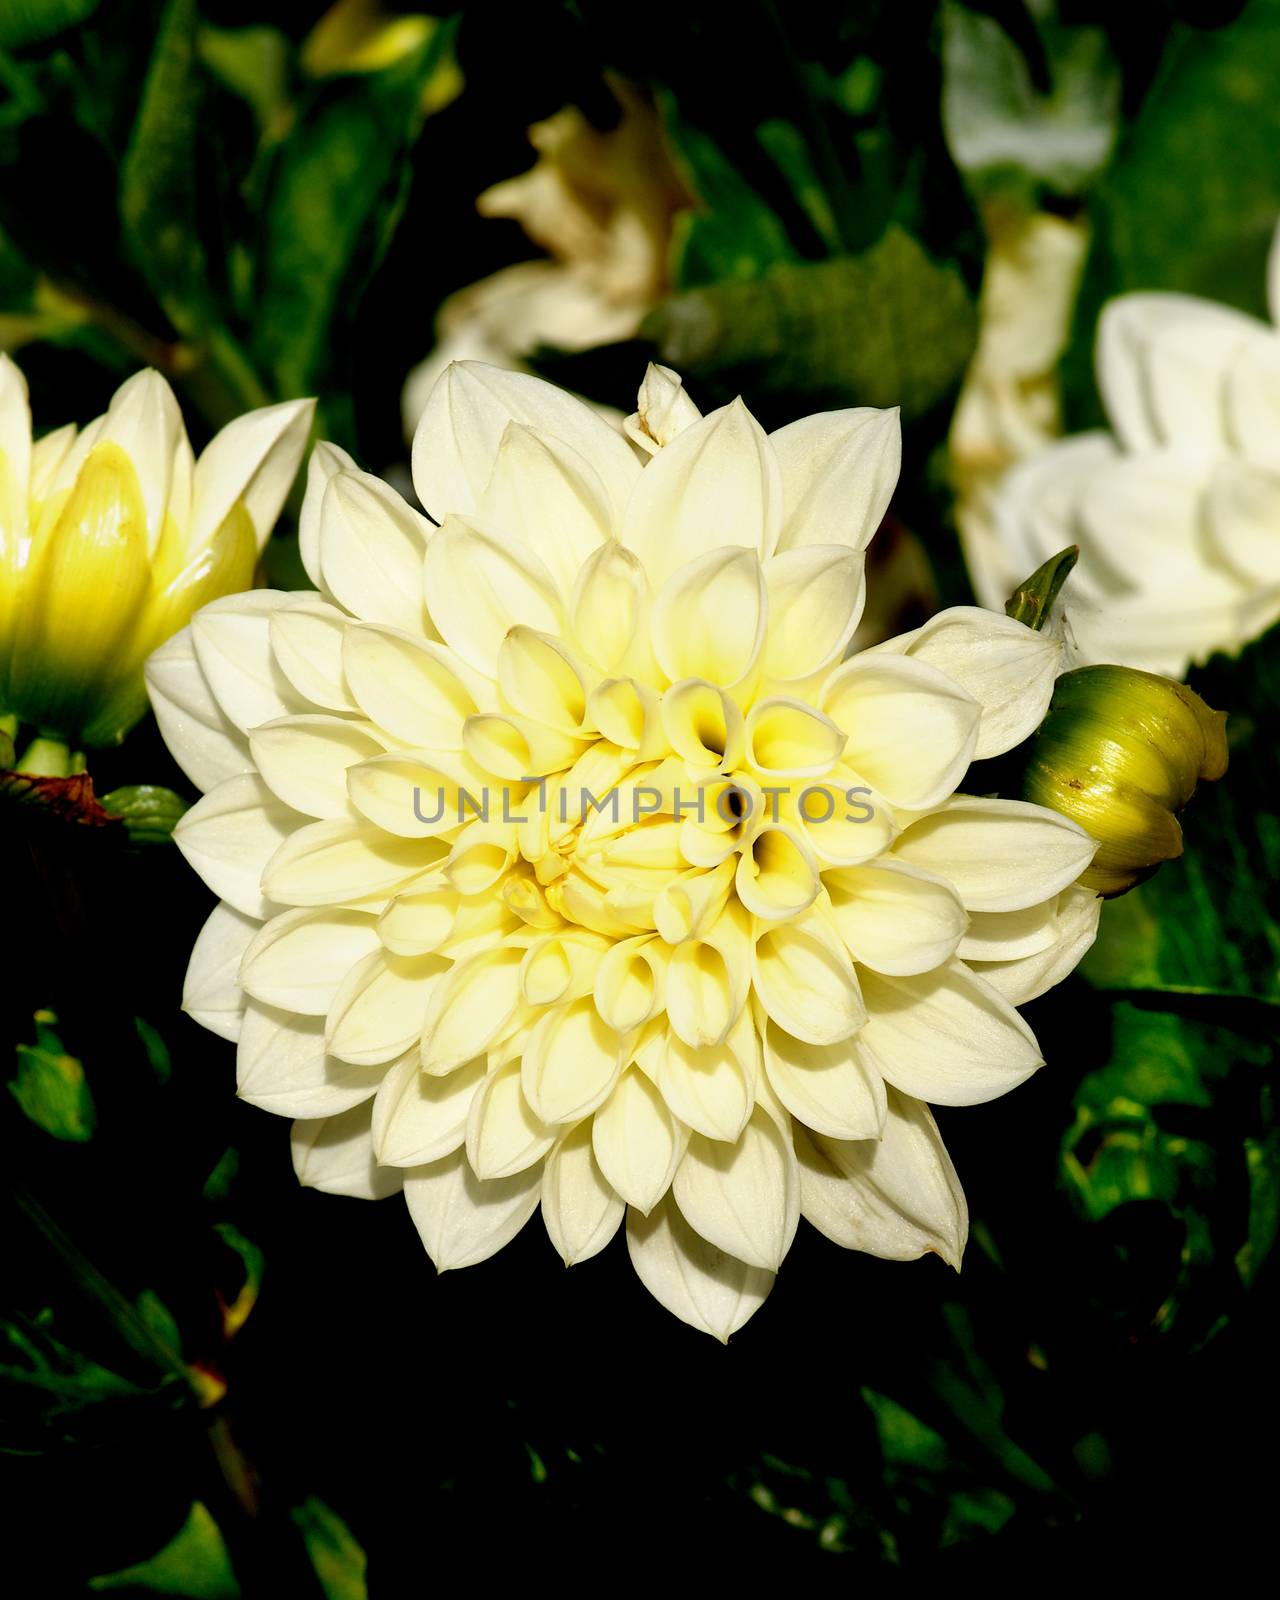 Big Yellow Flower of Dahlia with Buds closeup on Green Leafs background Outdoors